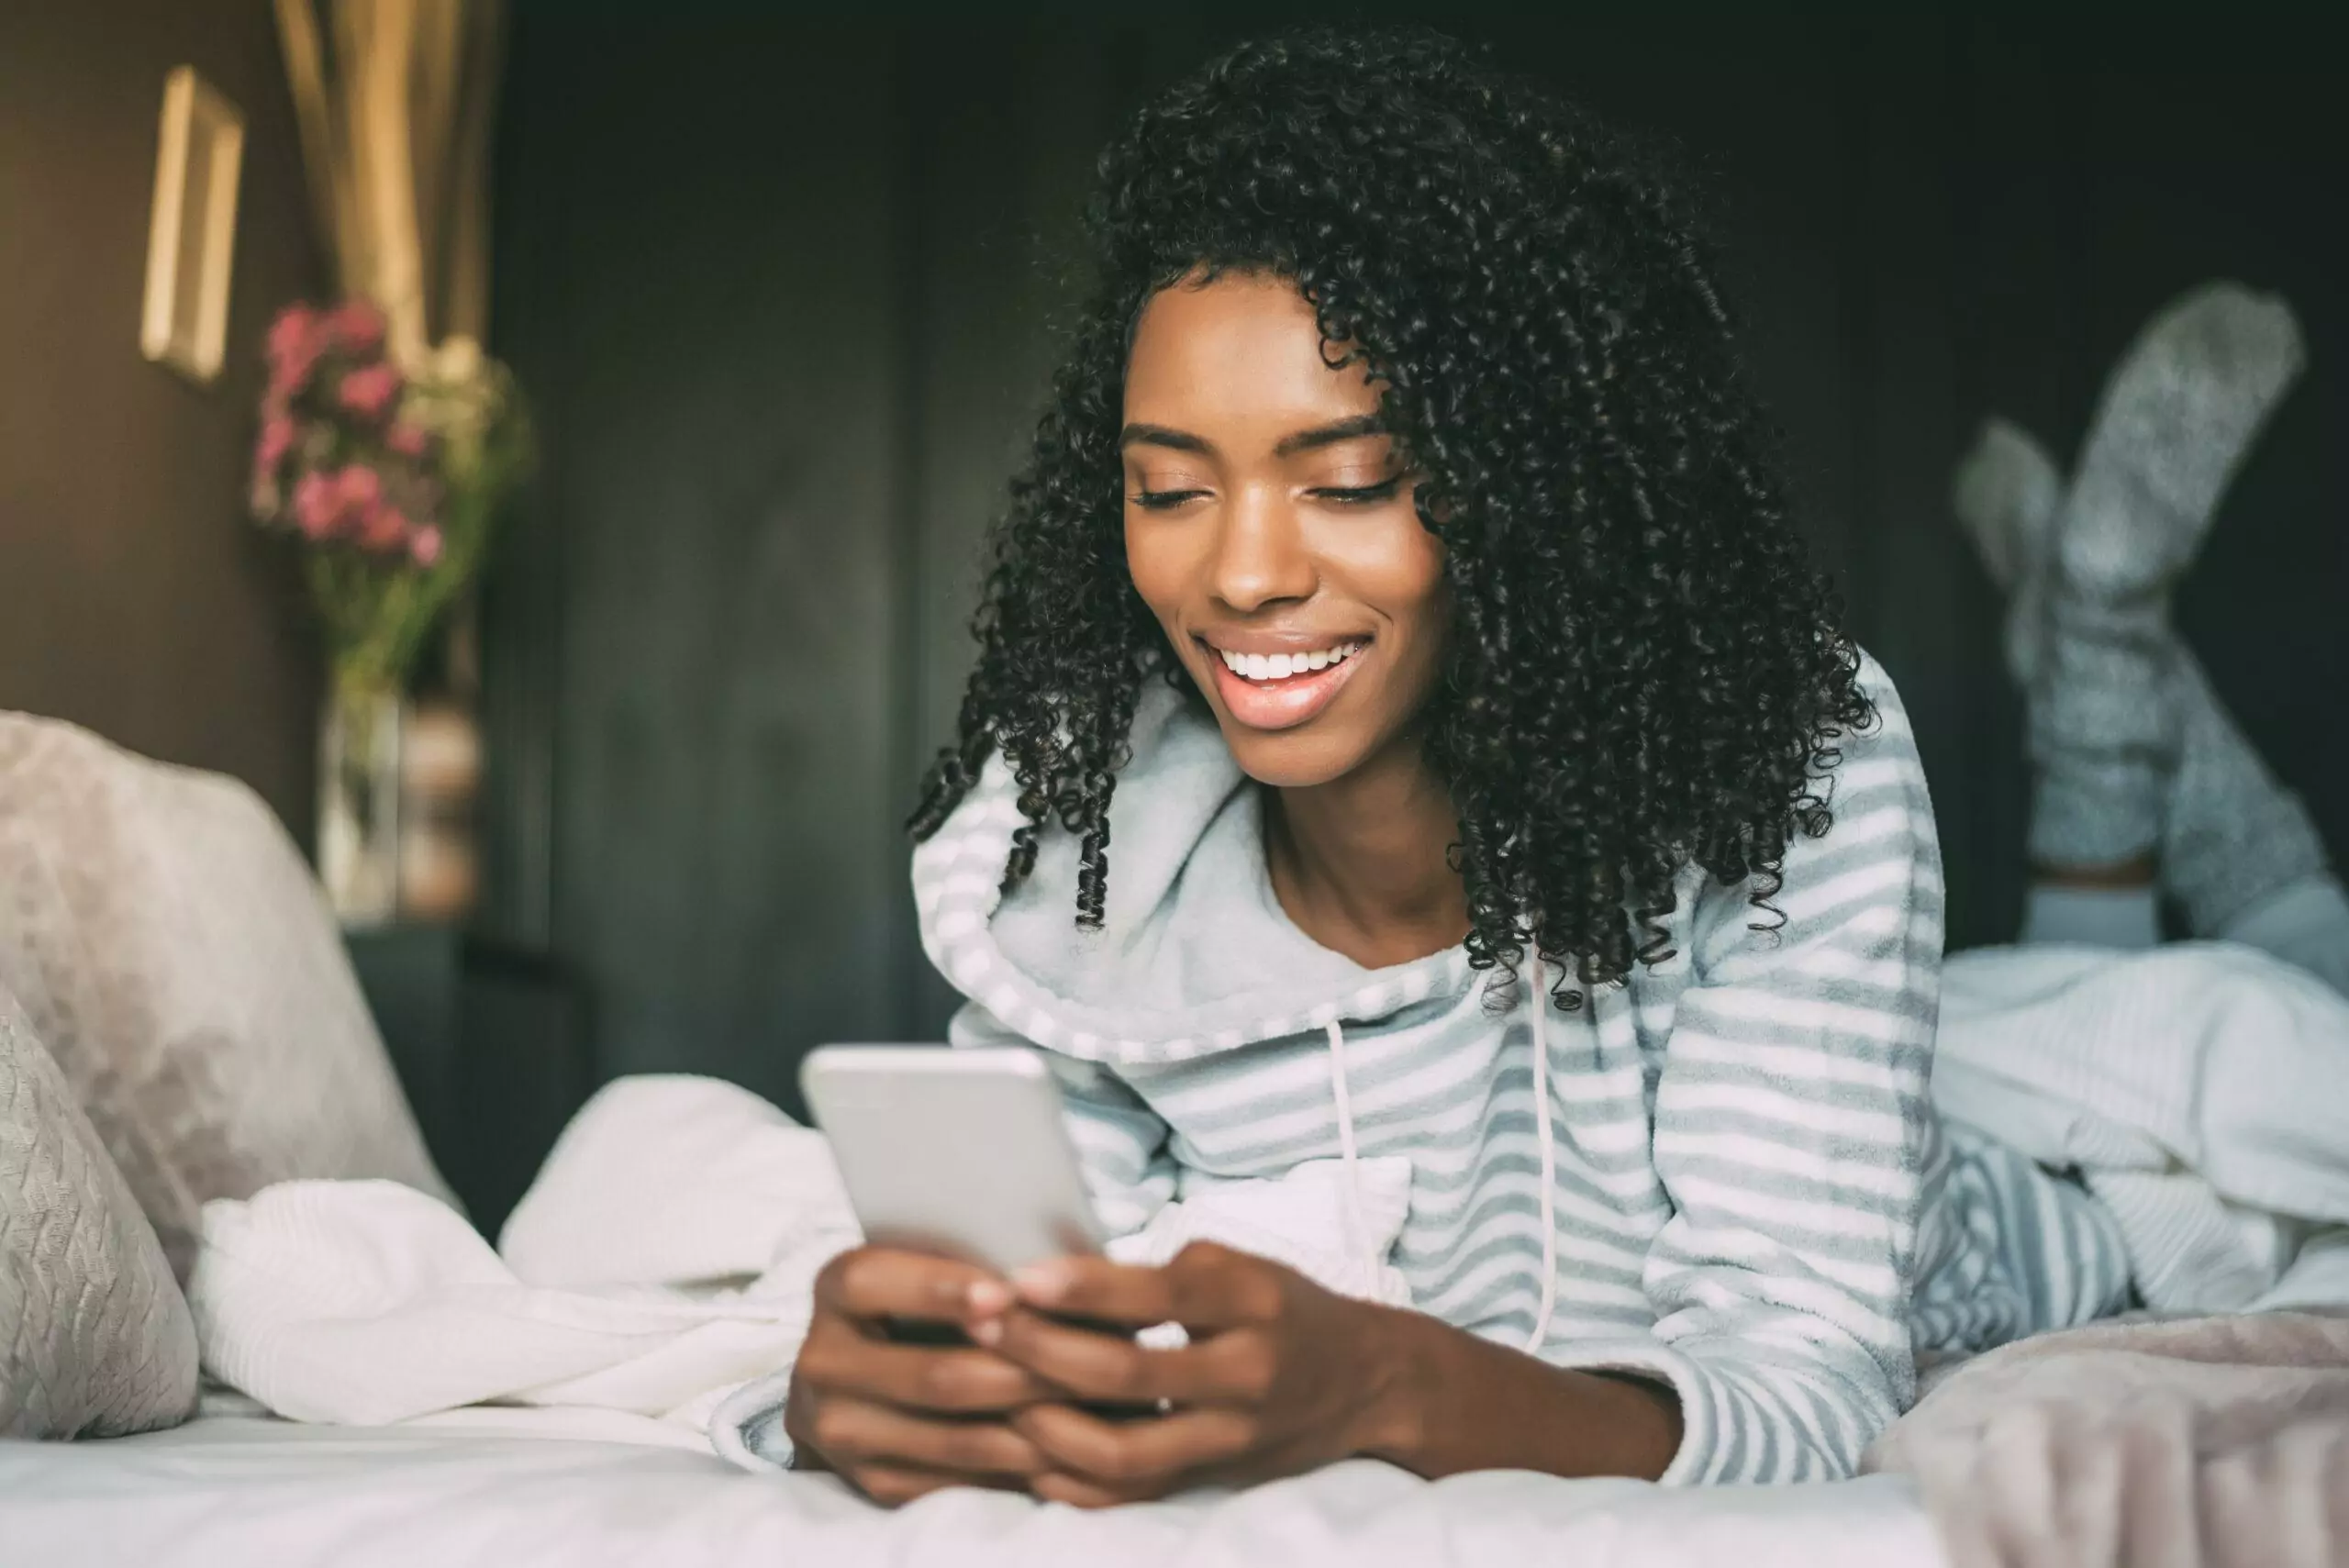 Pretty African-American woman with curly hair smiling and using her smartphone in bed